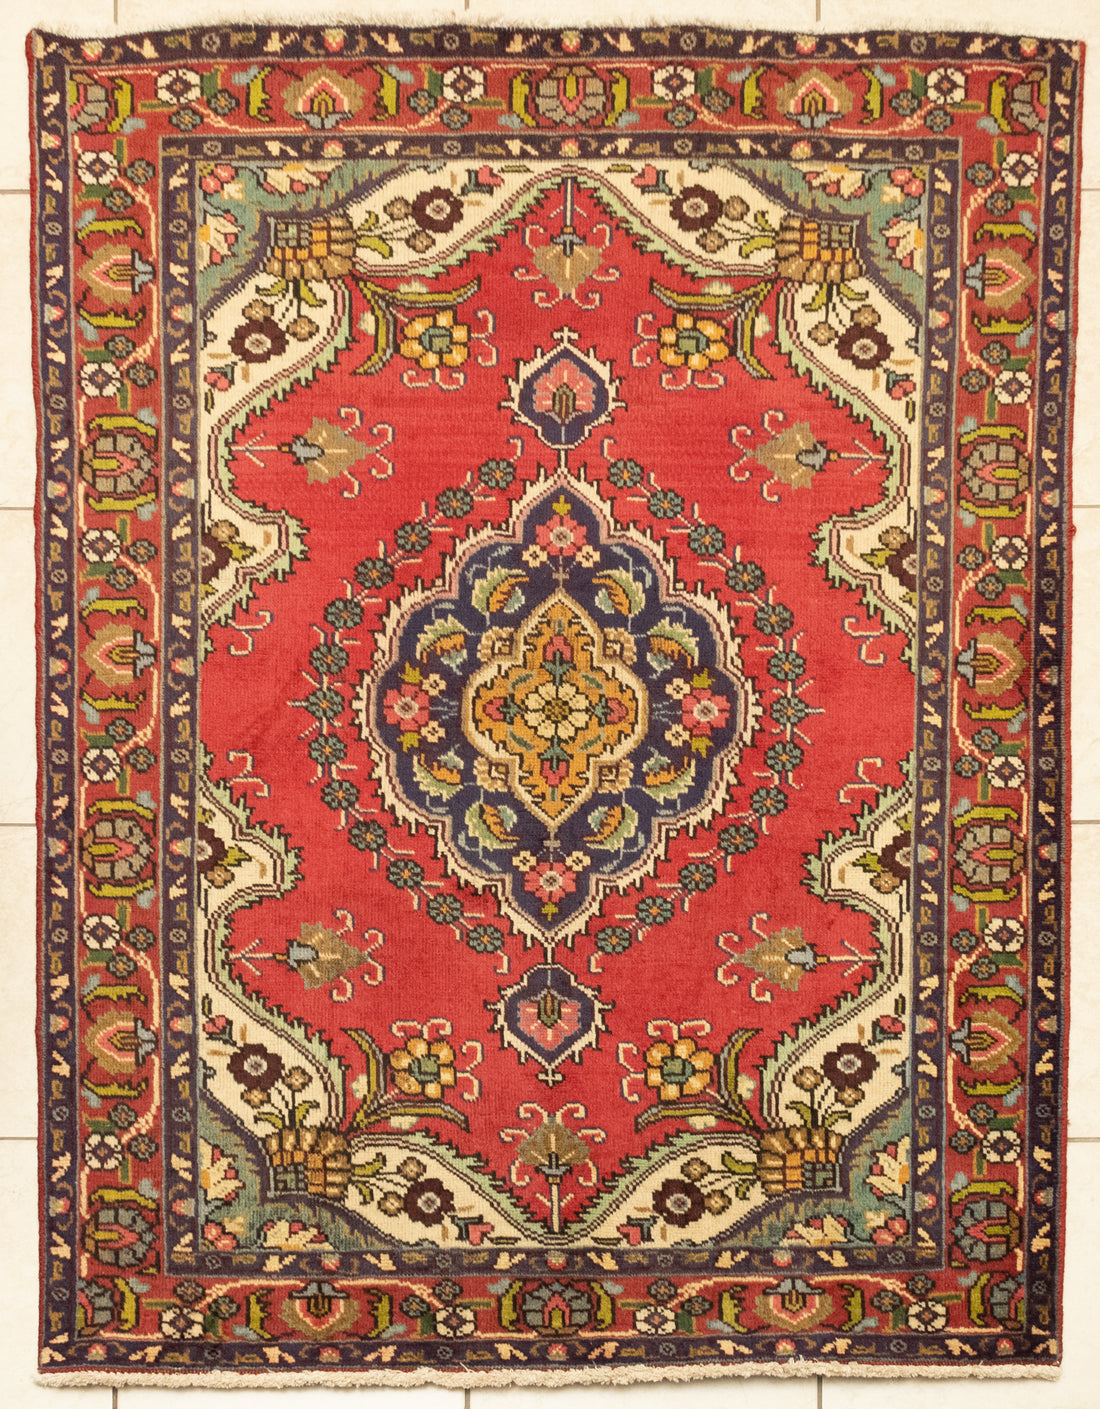 Hand-Knotted Wool Tabriz Rug 6'5" x 4'5"